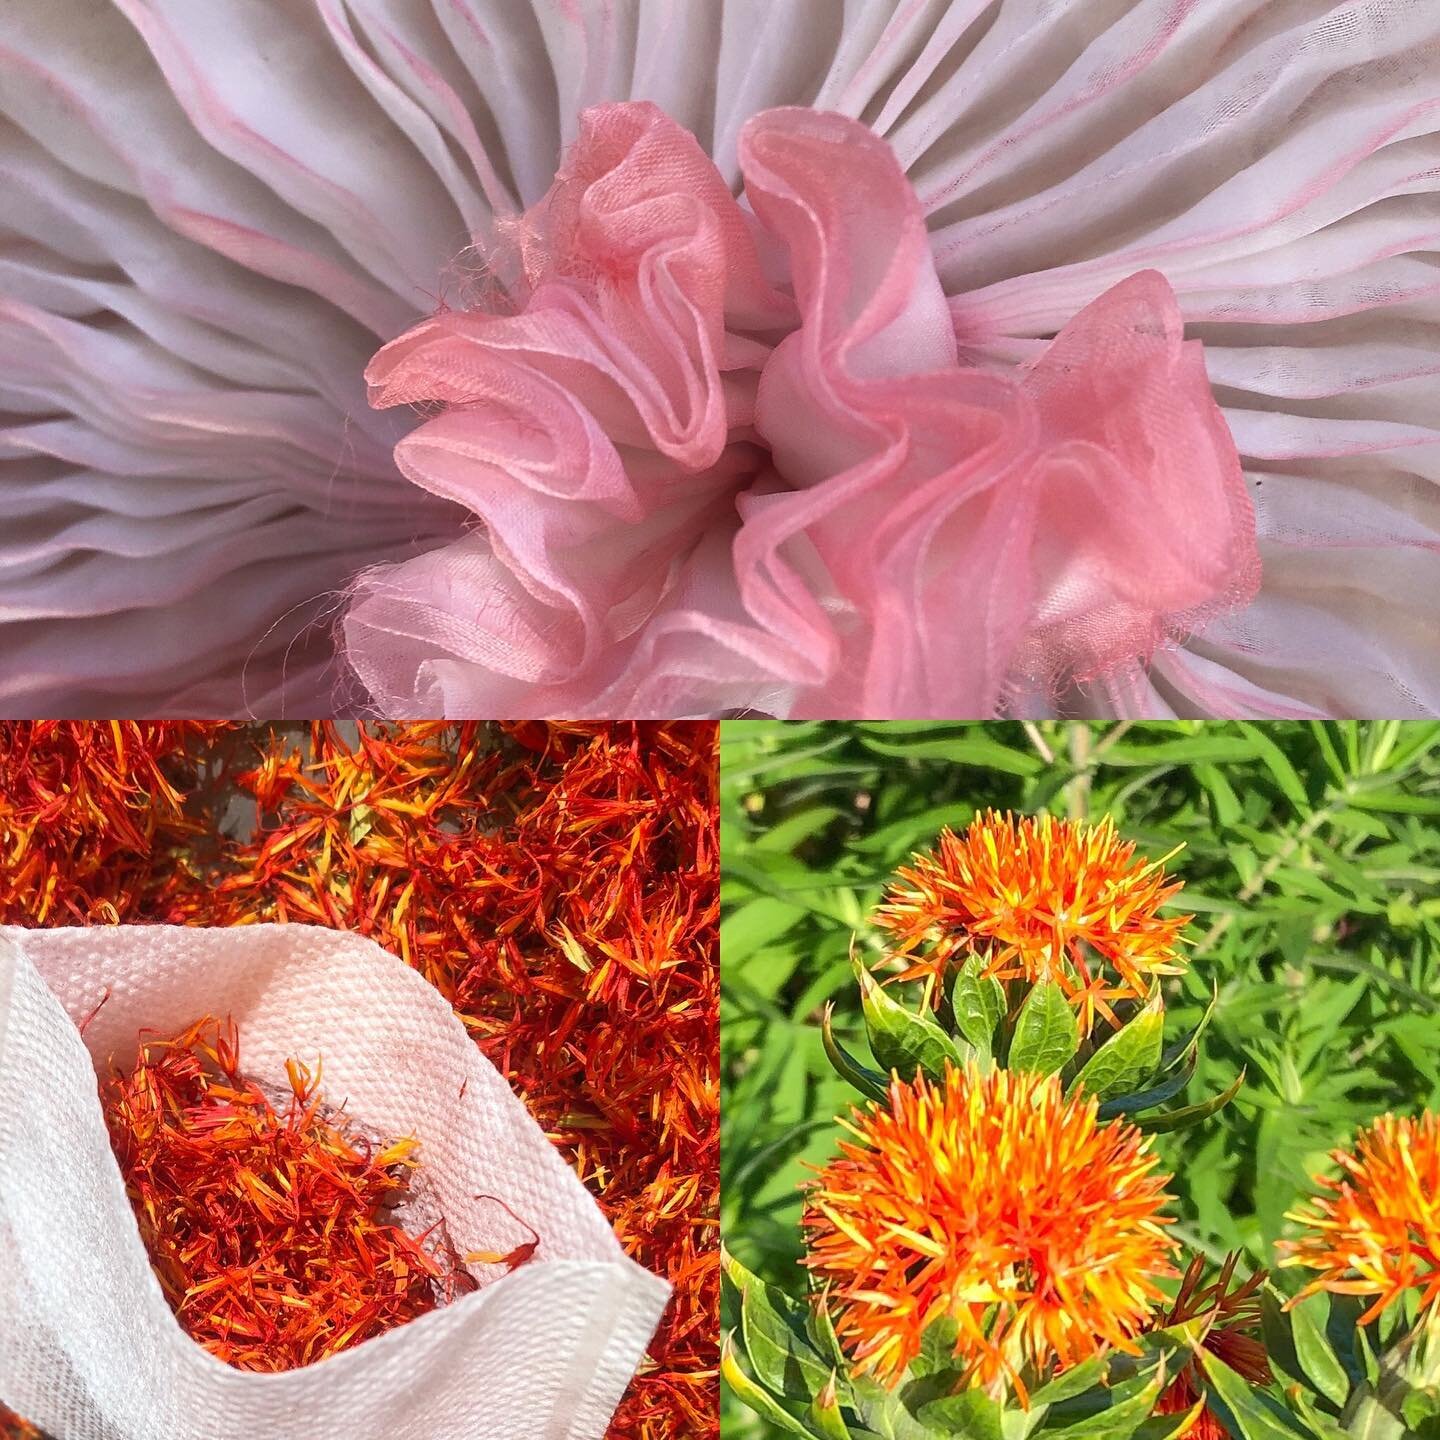 Safflower. My first season dyeing with these flower petals. First you extract yellow, then the pink remains, with the help of some ph shifting. #naturaldye #inspiredbynature #inspiredbypetals  #flowerdye  #safflowers